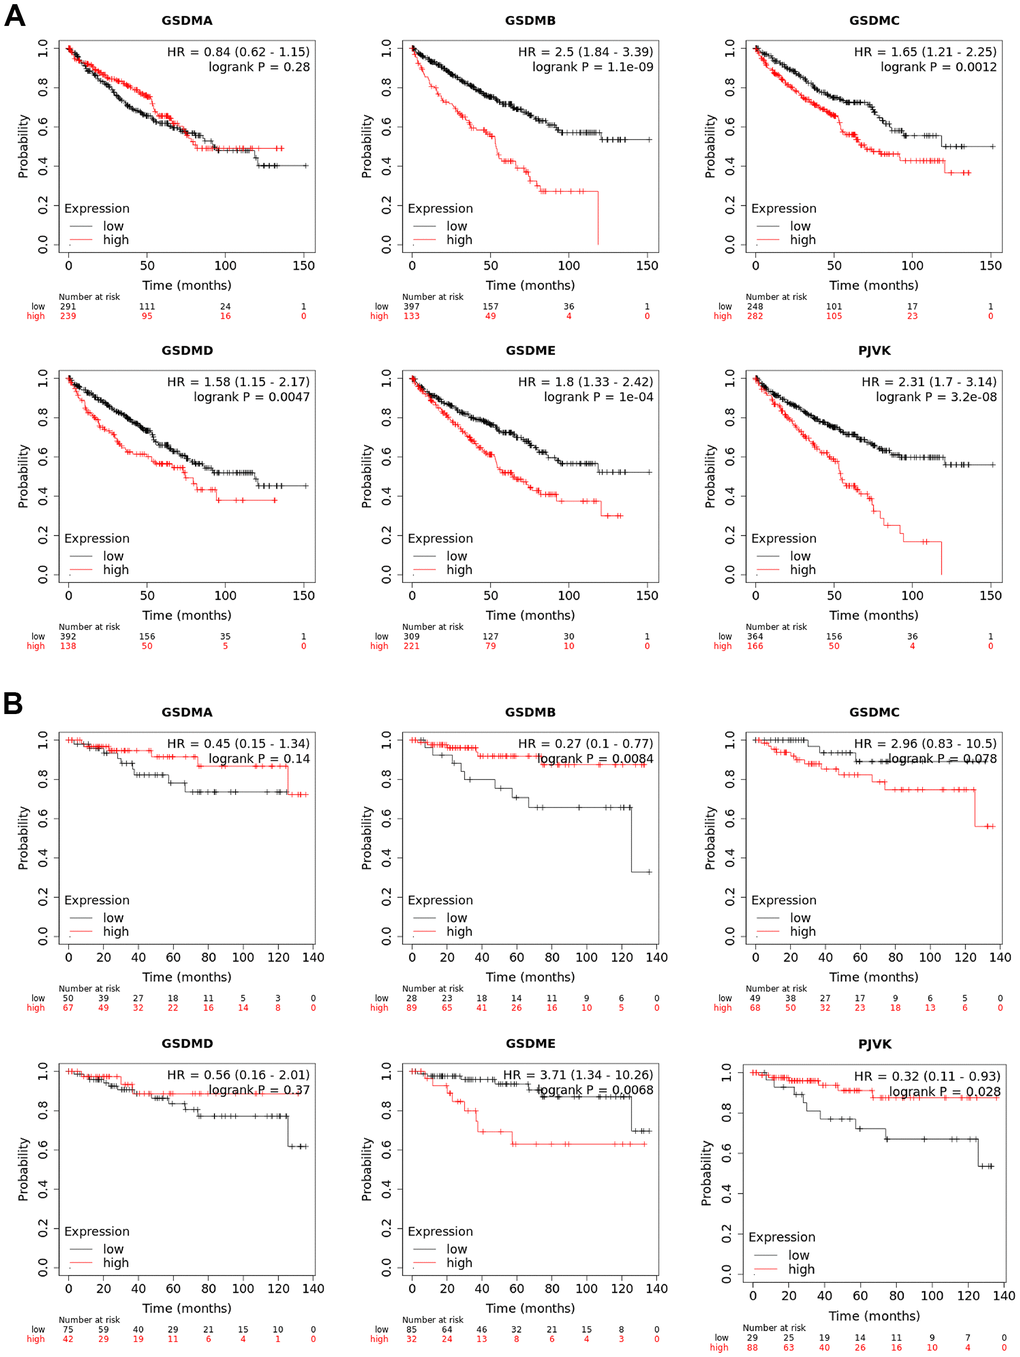 Prognostic values of GSDM family in ccRCC. (A) The overall survival (OS) curve of GSDM molecules in ccRCC patients (Kaplan-Meier plotter). (B) The relapse-free survival (RFS) curve of GSDM molecules in ccRCC patients (Kaplan-Meier plotter).